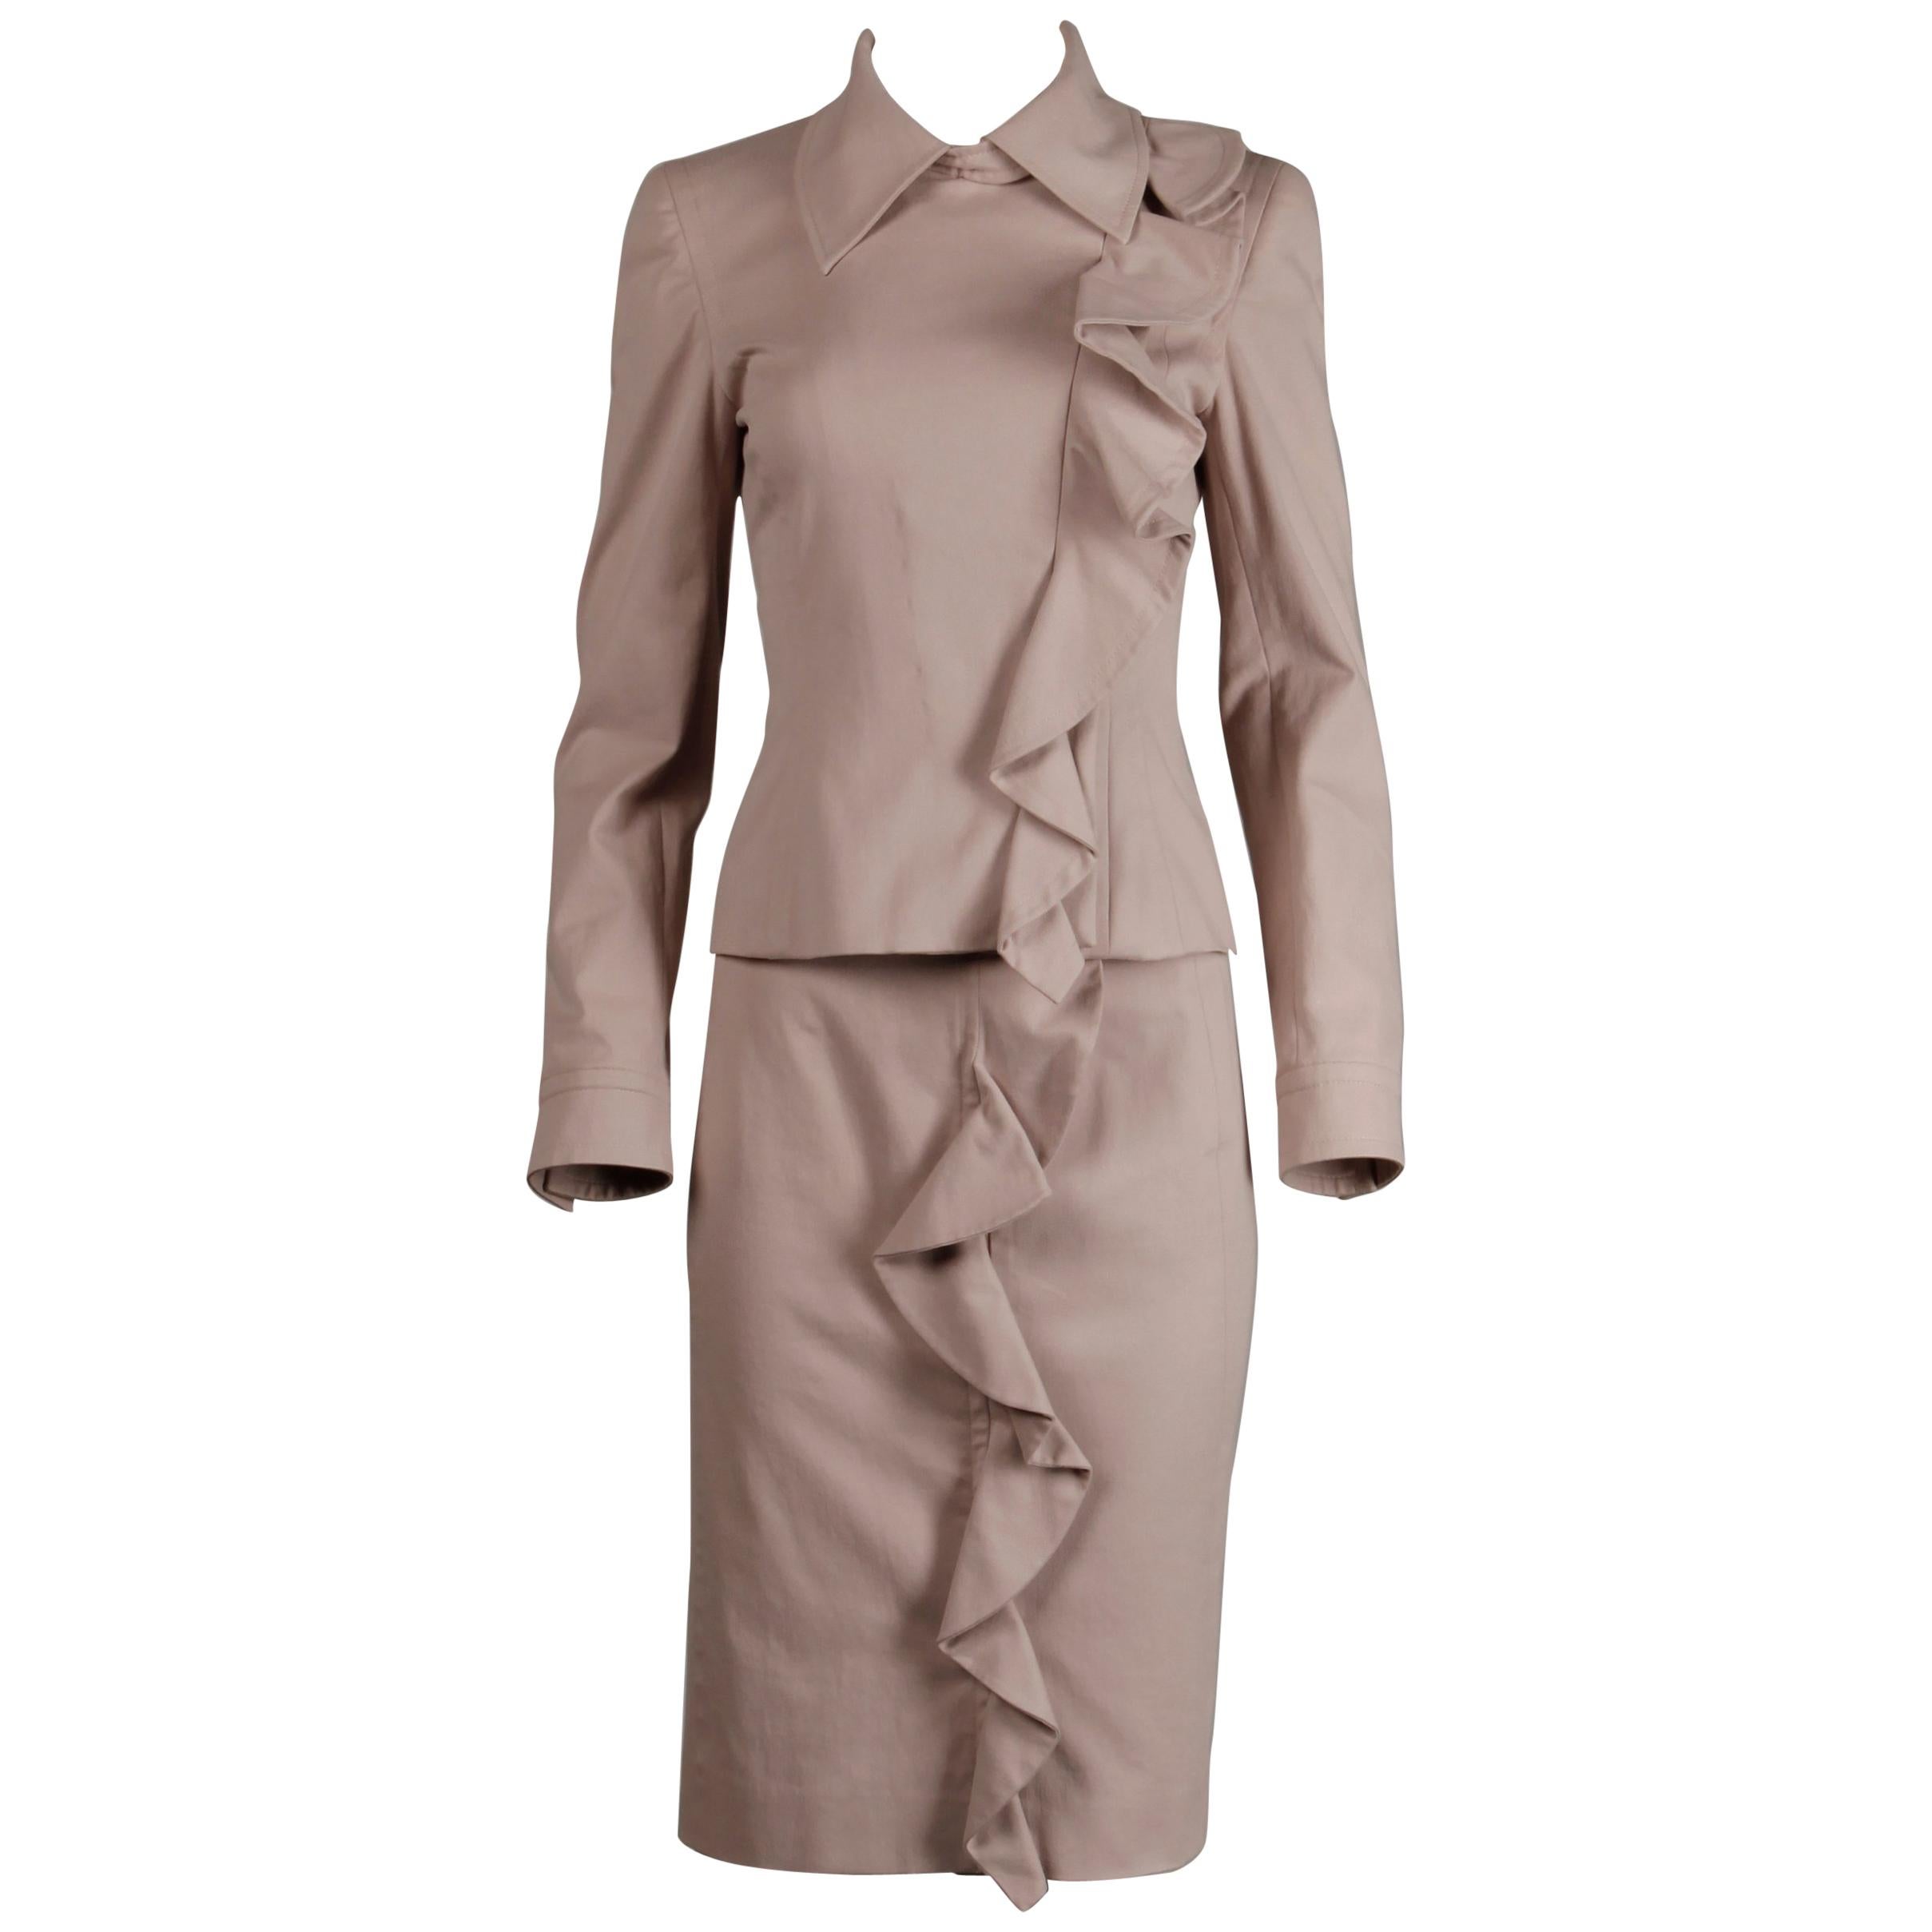 2003 Yves Saint Laurent by Tom Ford Pink Ruffle Jacket + Skirt Suit Ensemble YSL